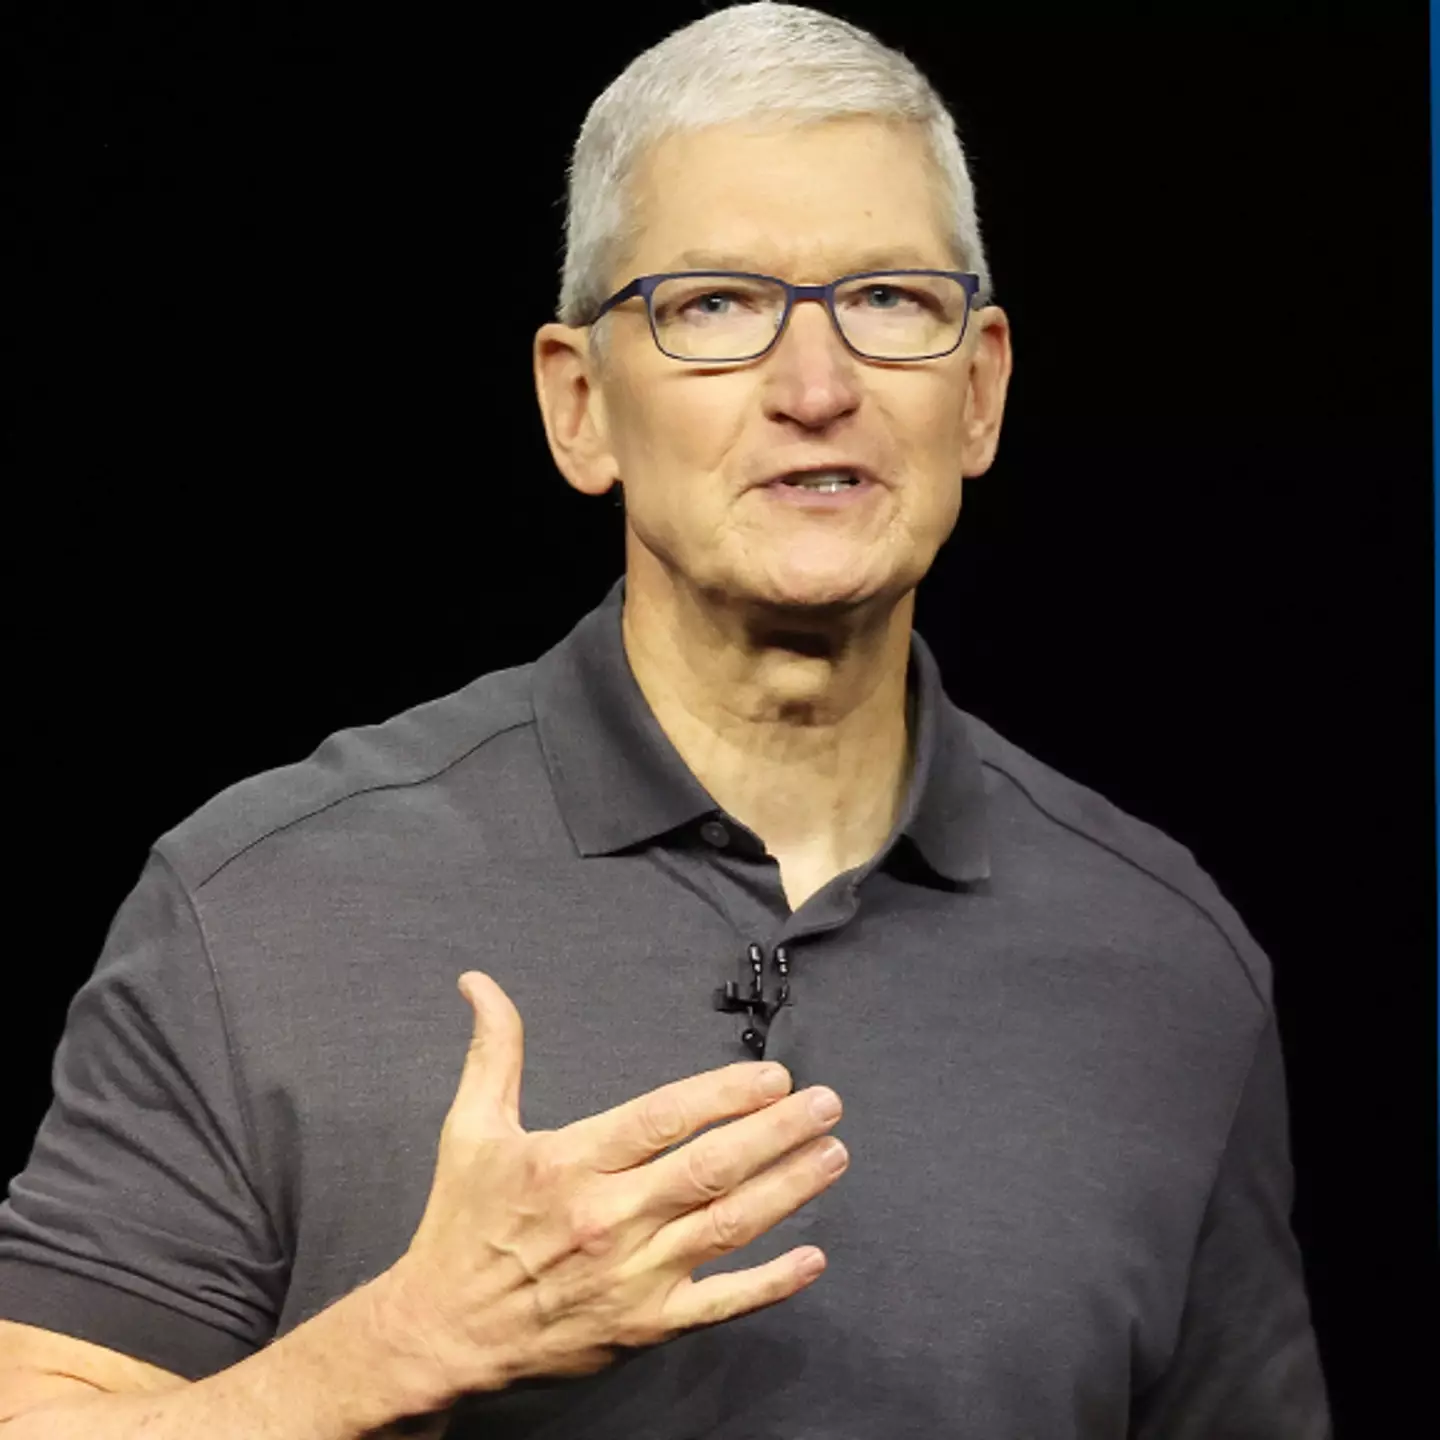 Wait, has Apple CEO Tim Cook really warned against 'excessive' smartphone use?